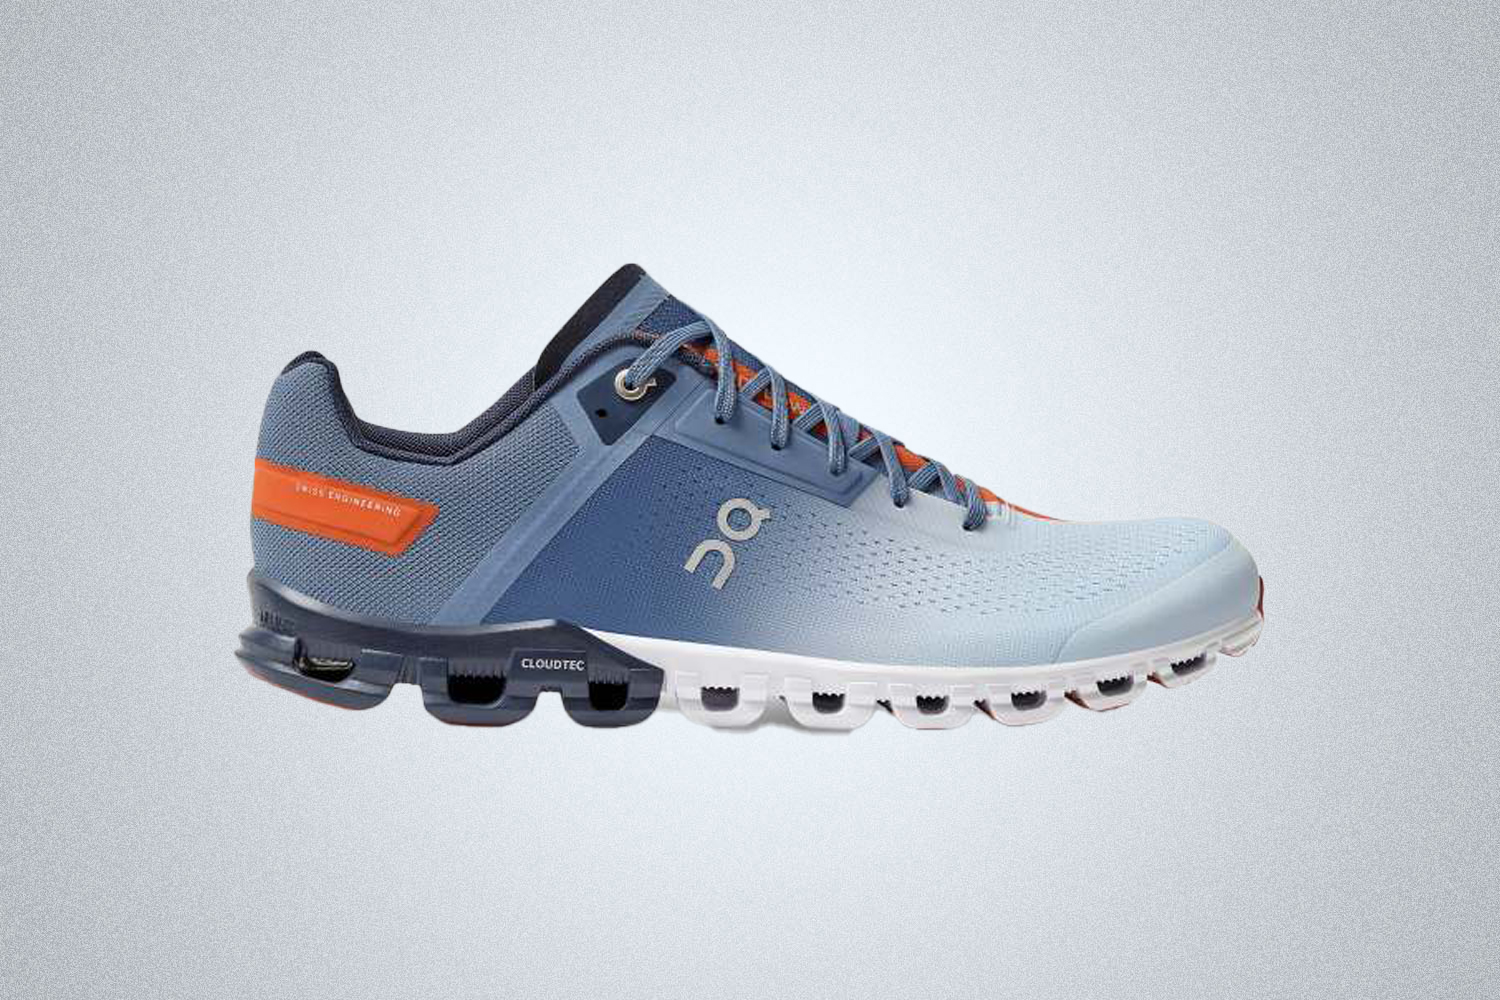 The On Running Cloudflow Shoe training shoe in blue and orange is one of the best fitness shoes in 2021 for trainers, runners and CrossFit athletes alike